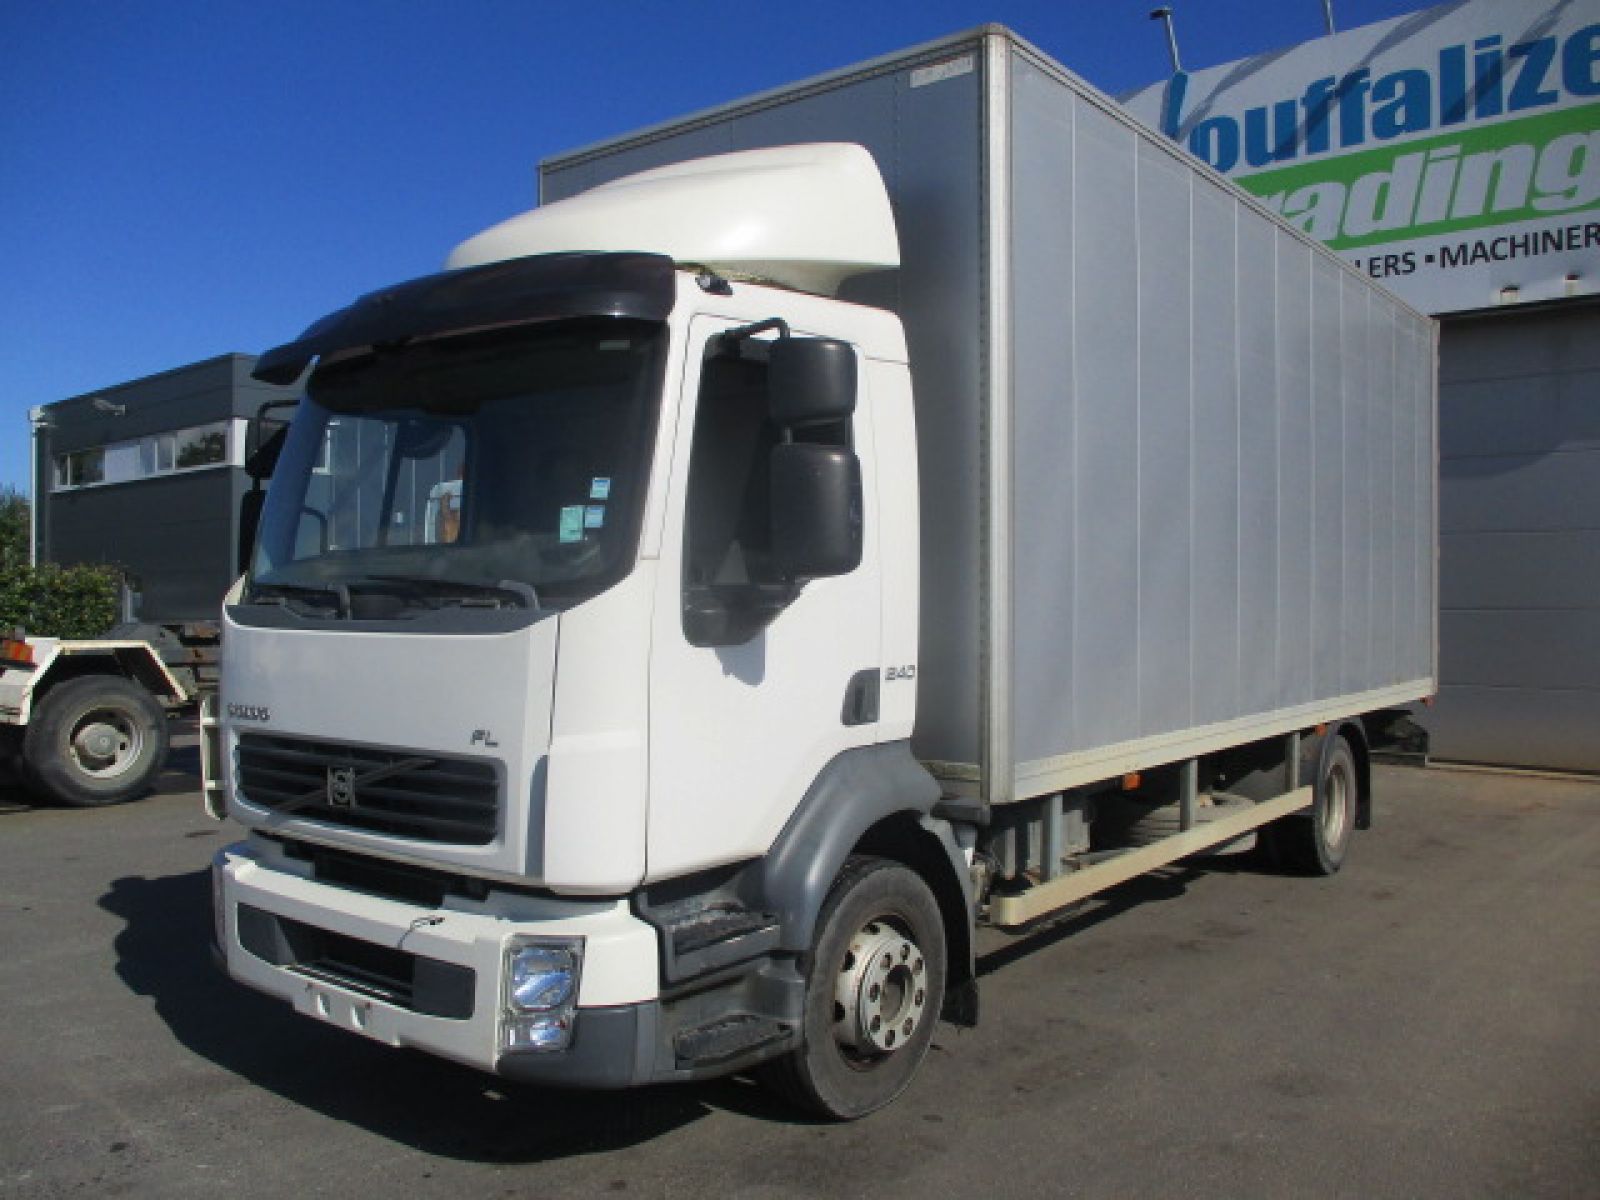 Second hand saleTruck units - VOLVO FL 240  FOURGON (Belgique - Europe) - Houffalize Trading s.a.